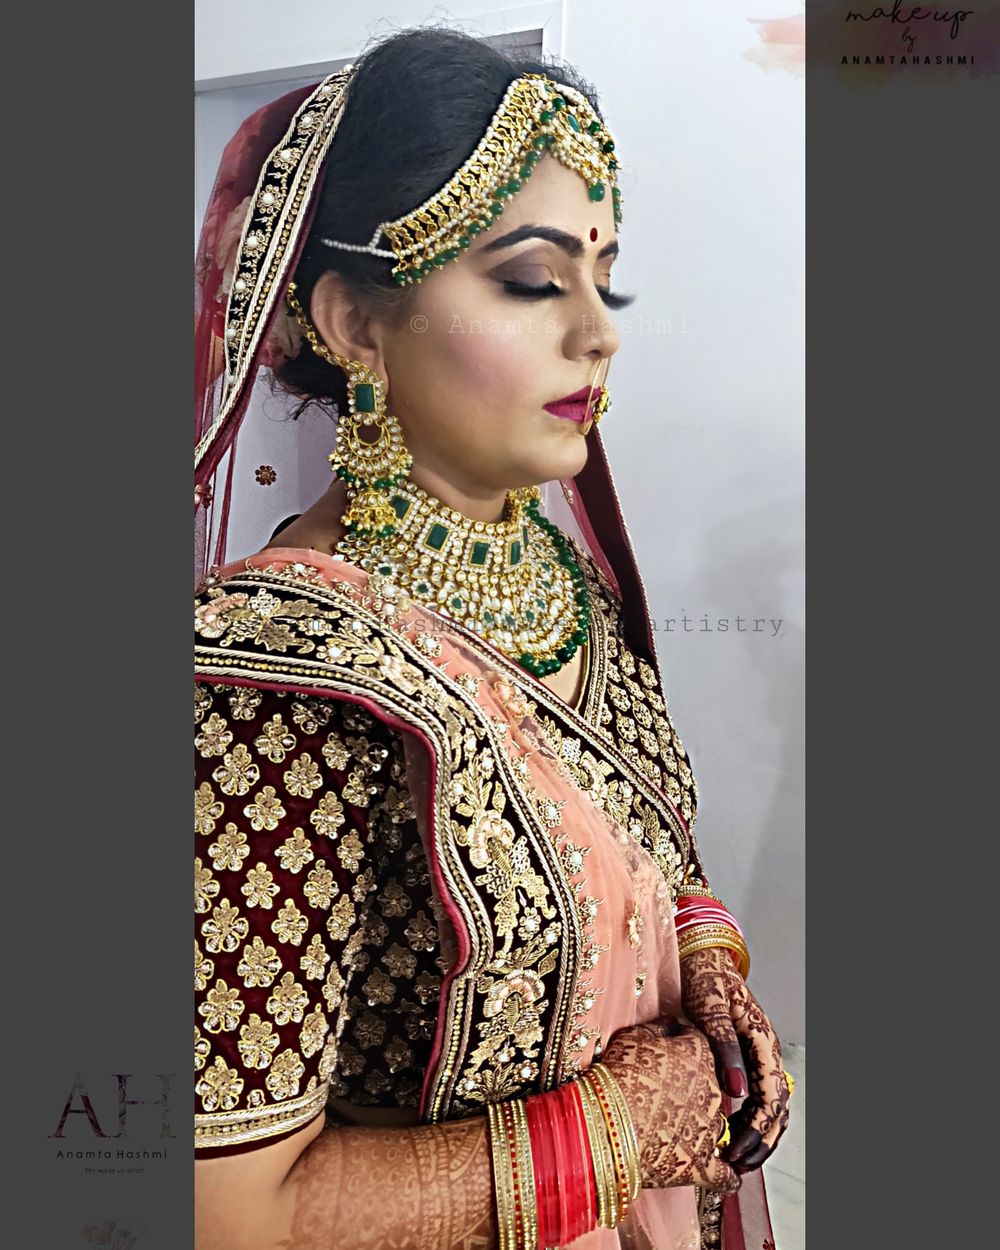 Photo From Pooja on her wedding day - By Make-up by Anamta Hashmi